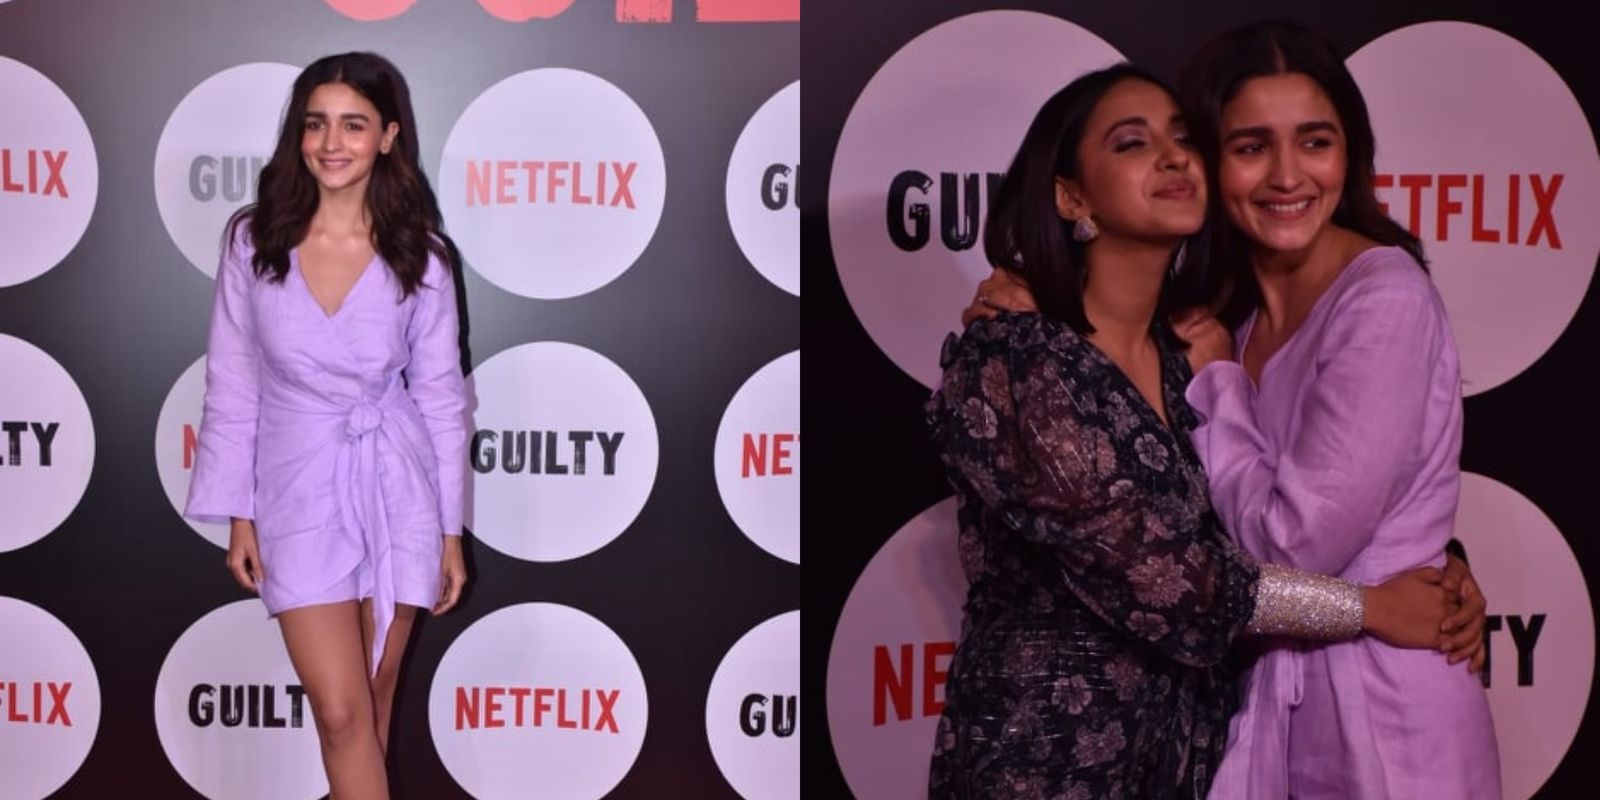 Alia Bhatt Rocks The Red Carpet Of Guilty In A Chic Yet Affordable Mini Dress That Could Be Your Favorite This Summer